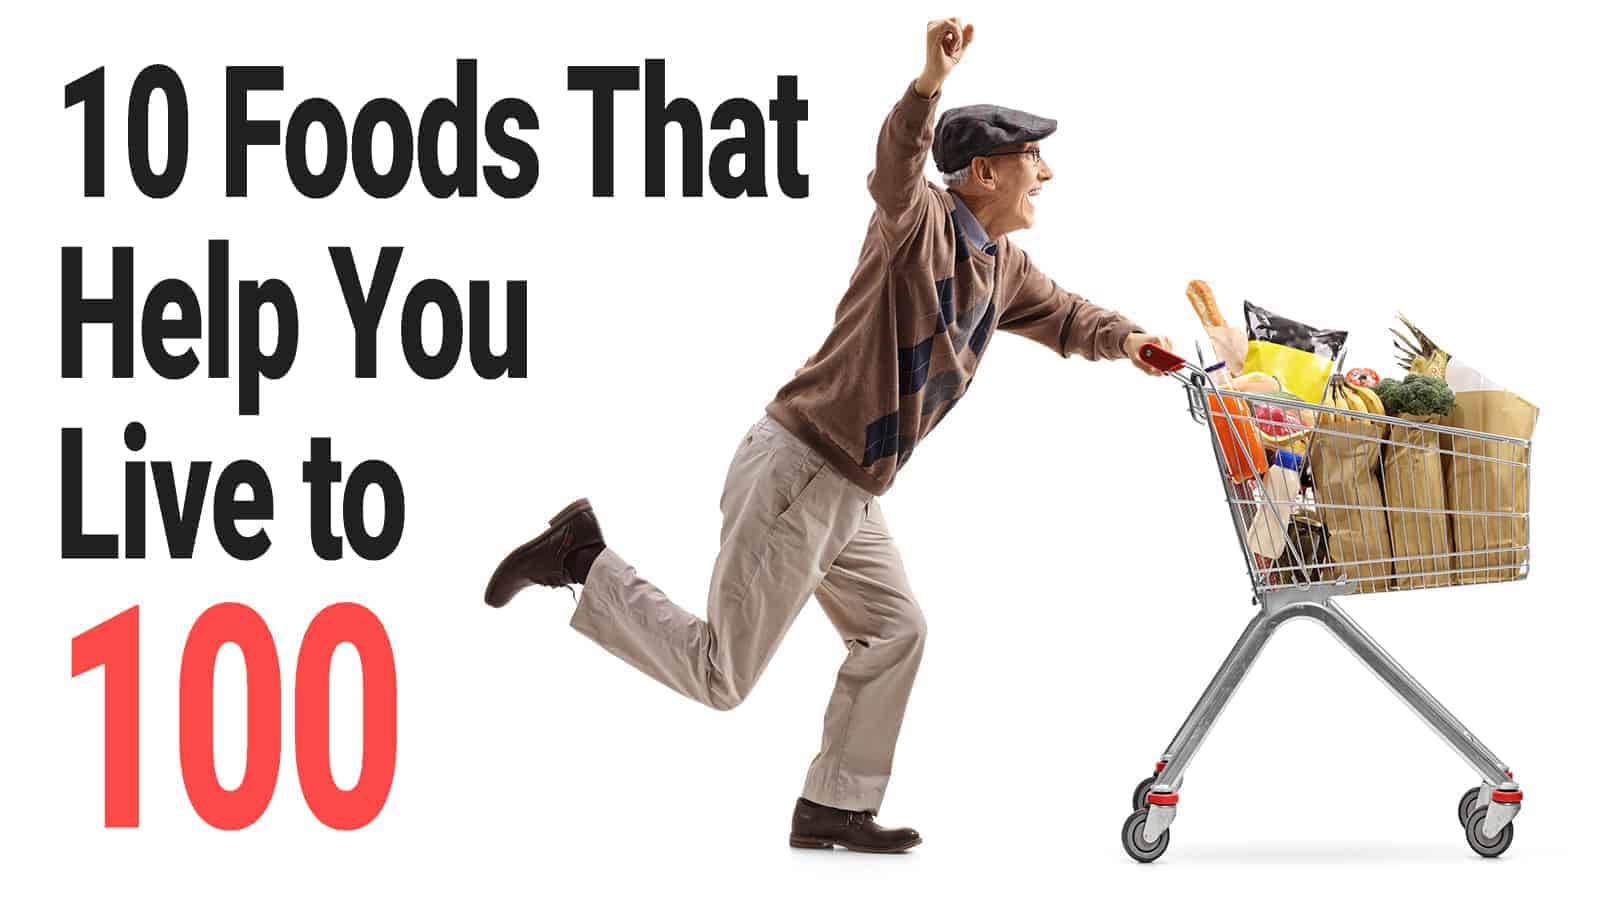 10 Foods That Help You Live to 100